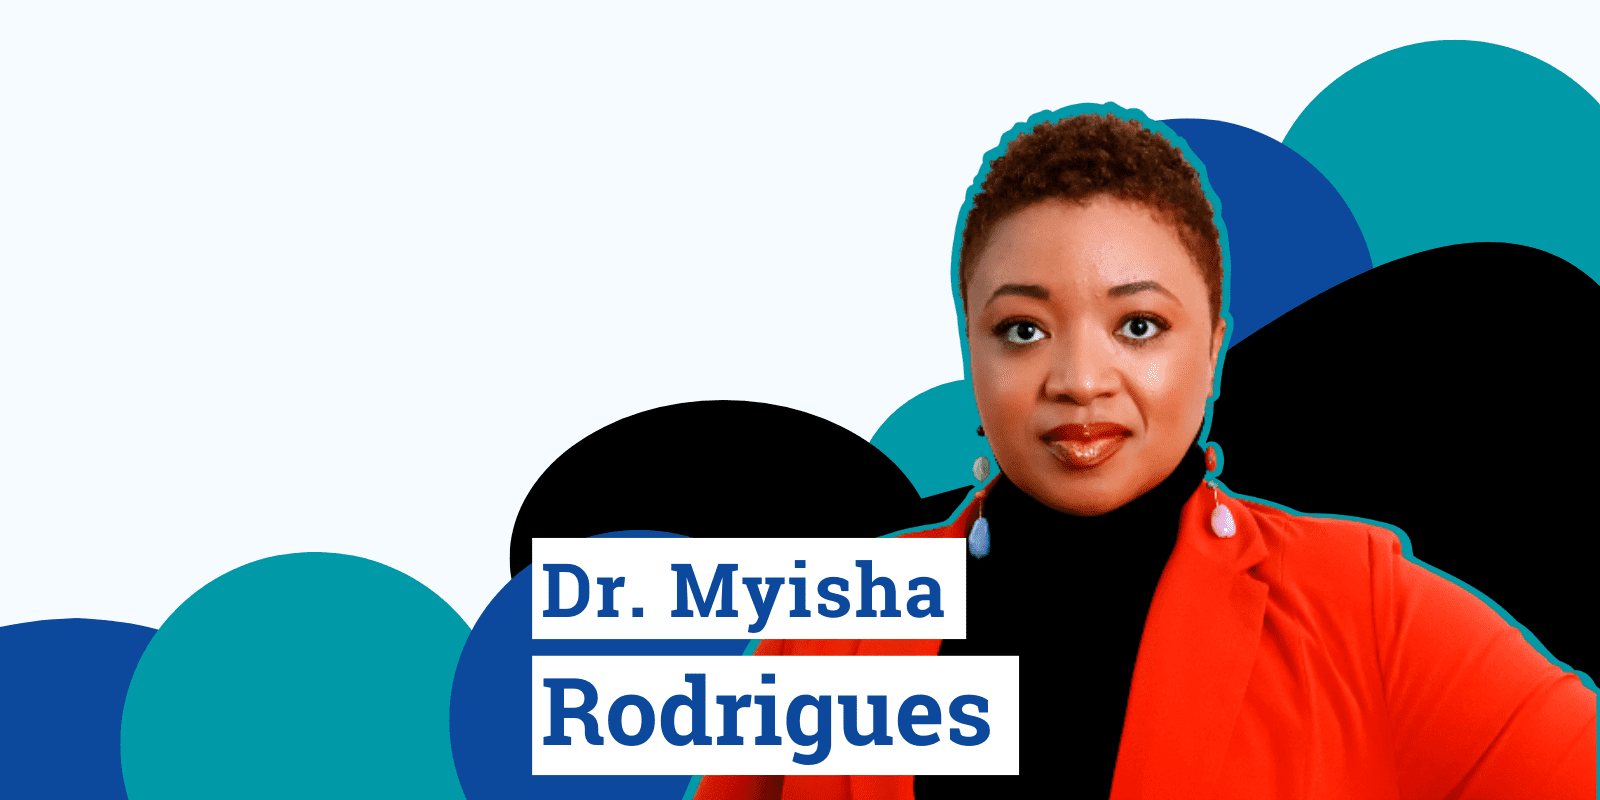 a Black woman wearing a red blazer over a black top. Text reads "Dr. Myisha Rodrigues"